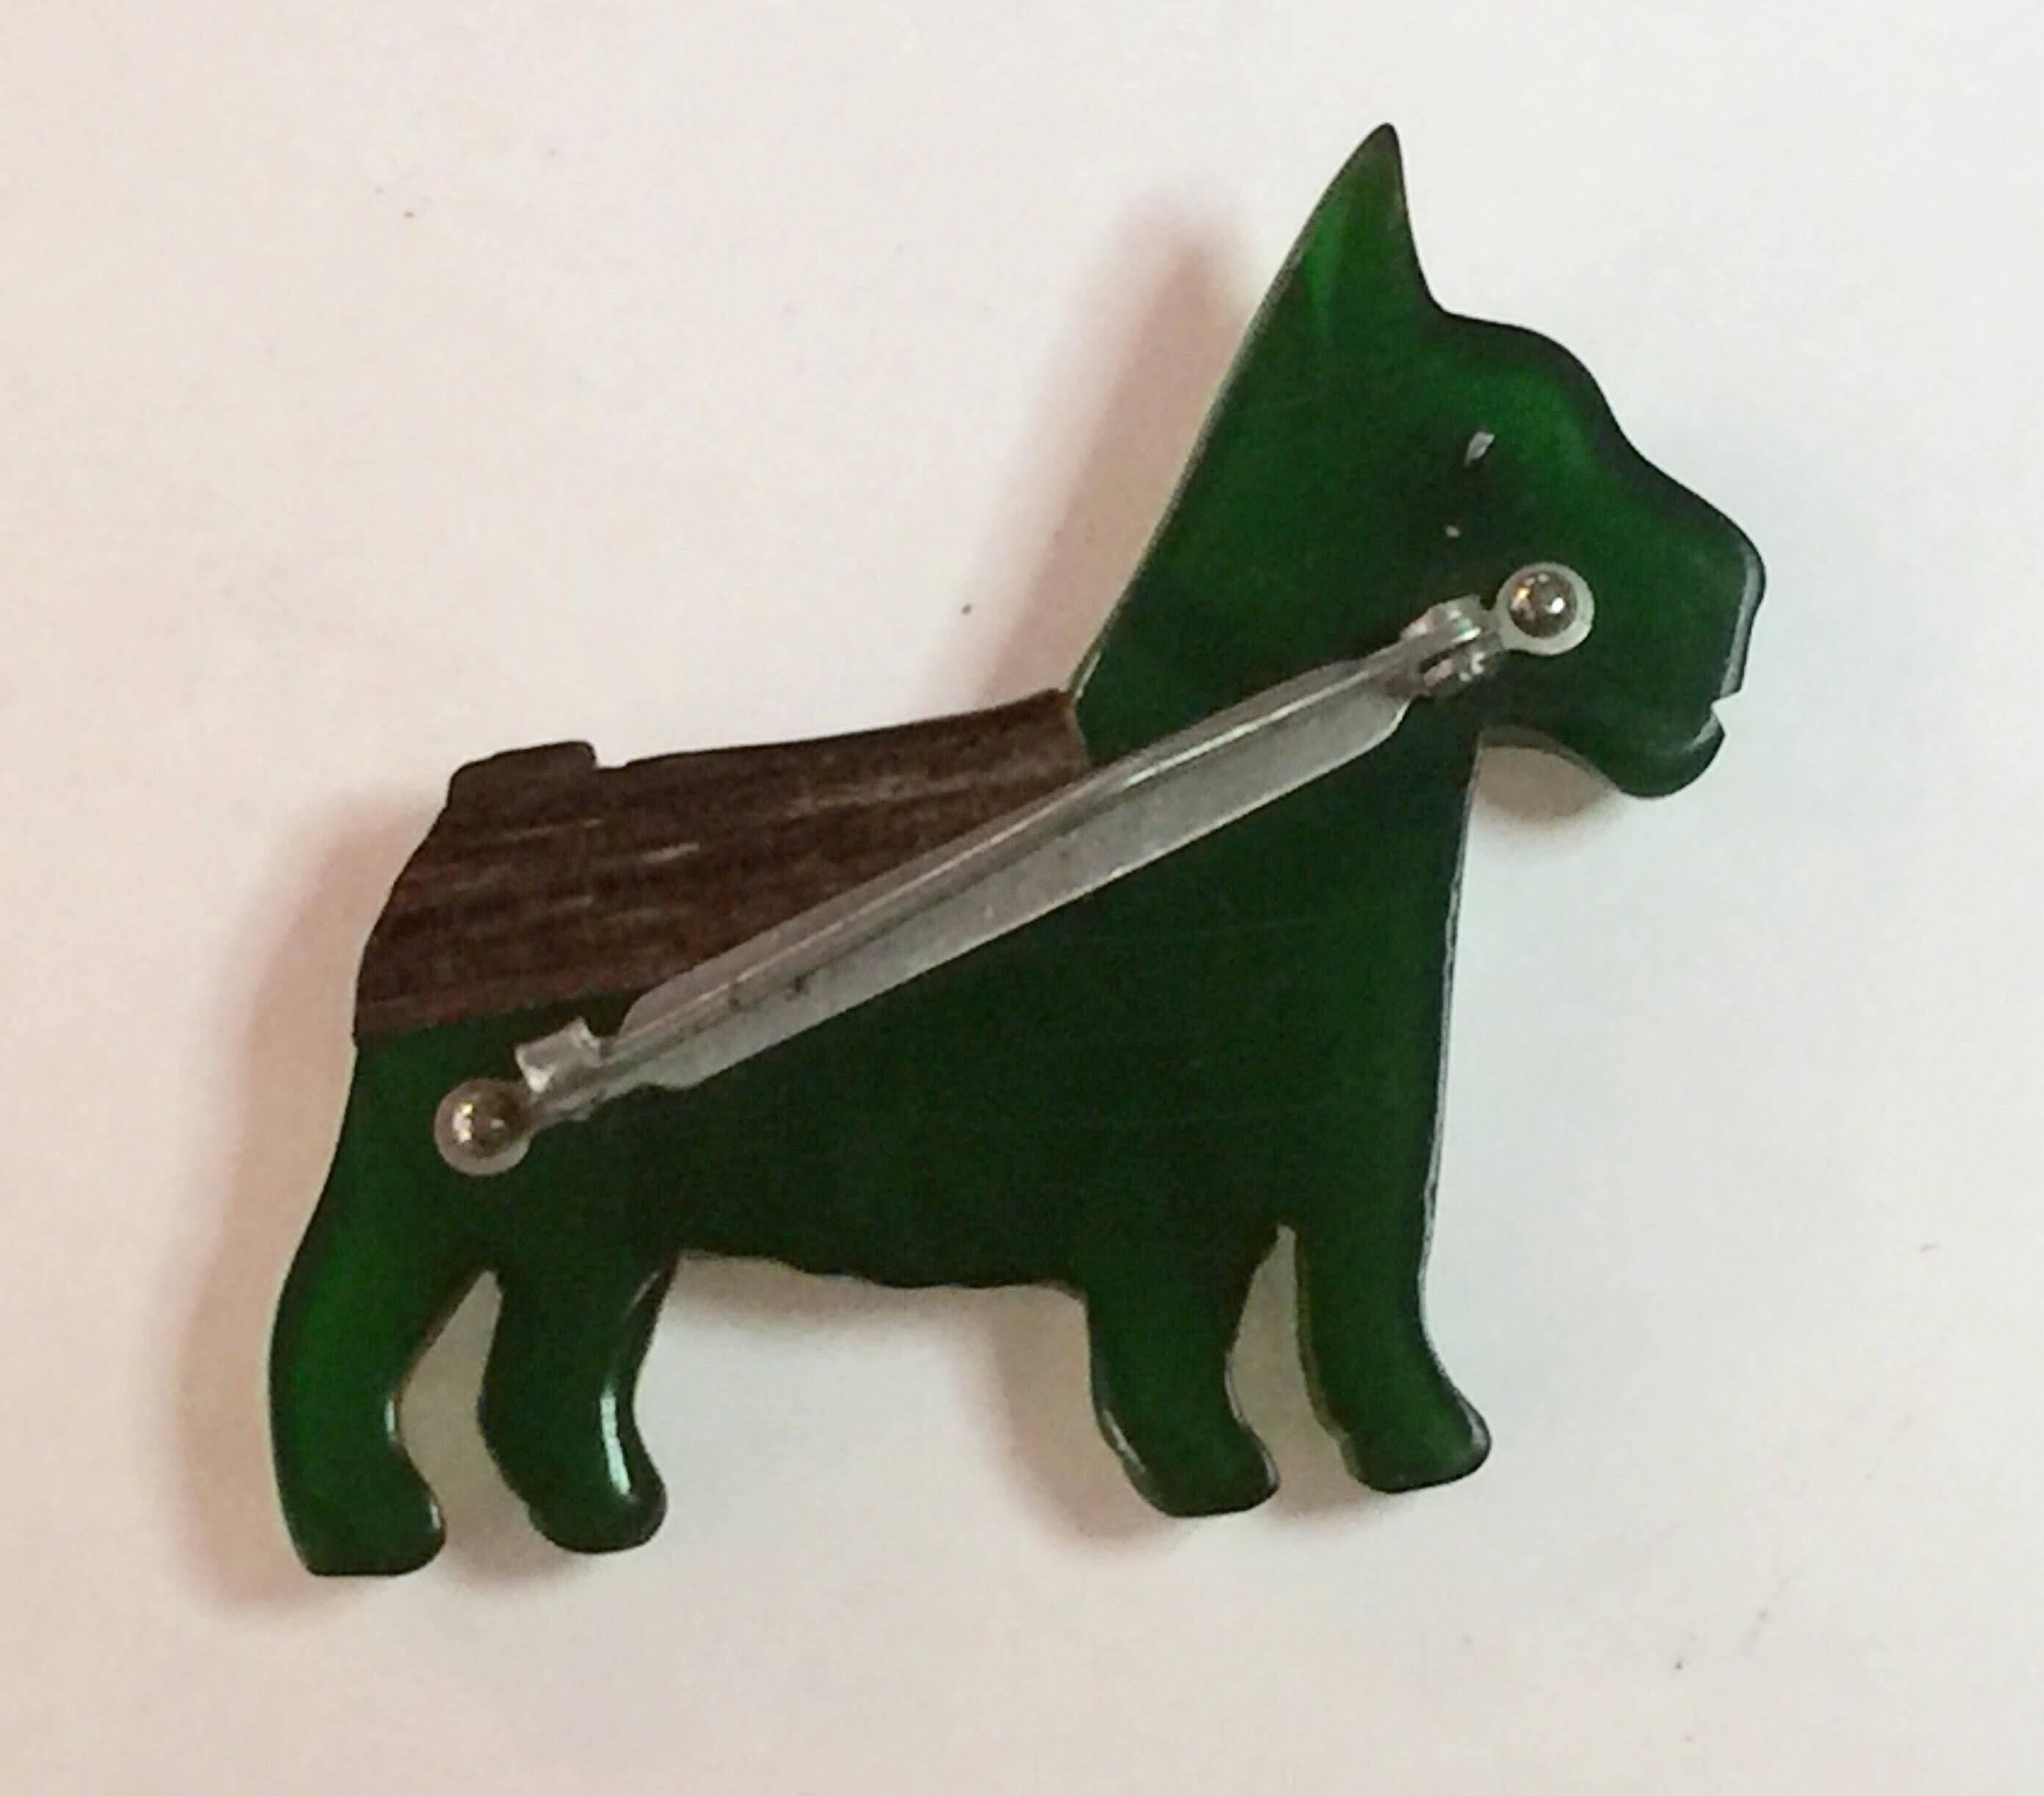 Another canine creation offered here is this GREEN Bakelite and Laminated Wood Terrier Dog Pin Brooch, also classically 1930s and very much representative of the whimsicality of bakelite figural animal pins. 2.25